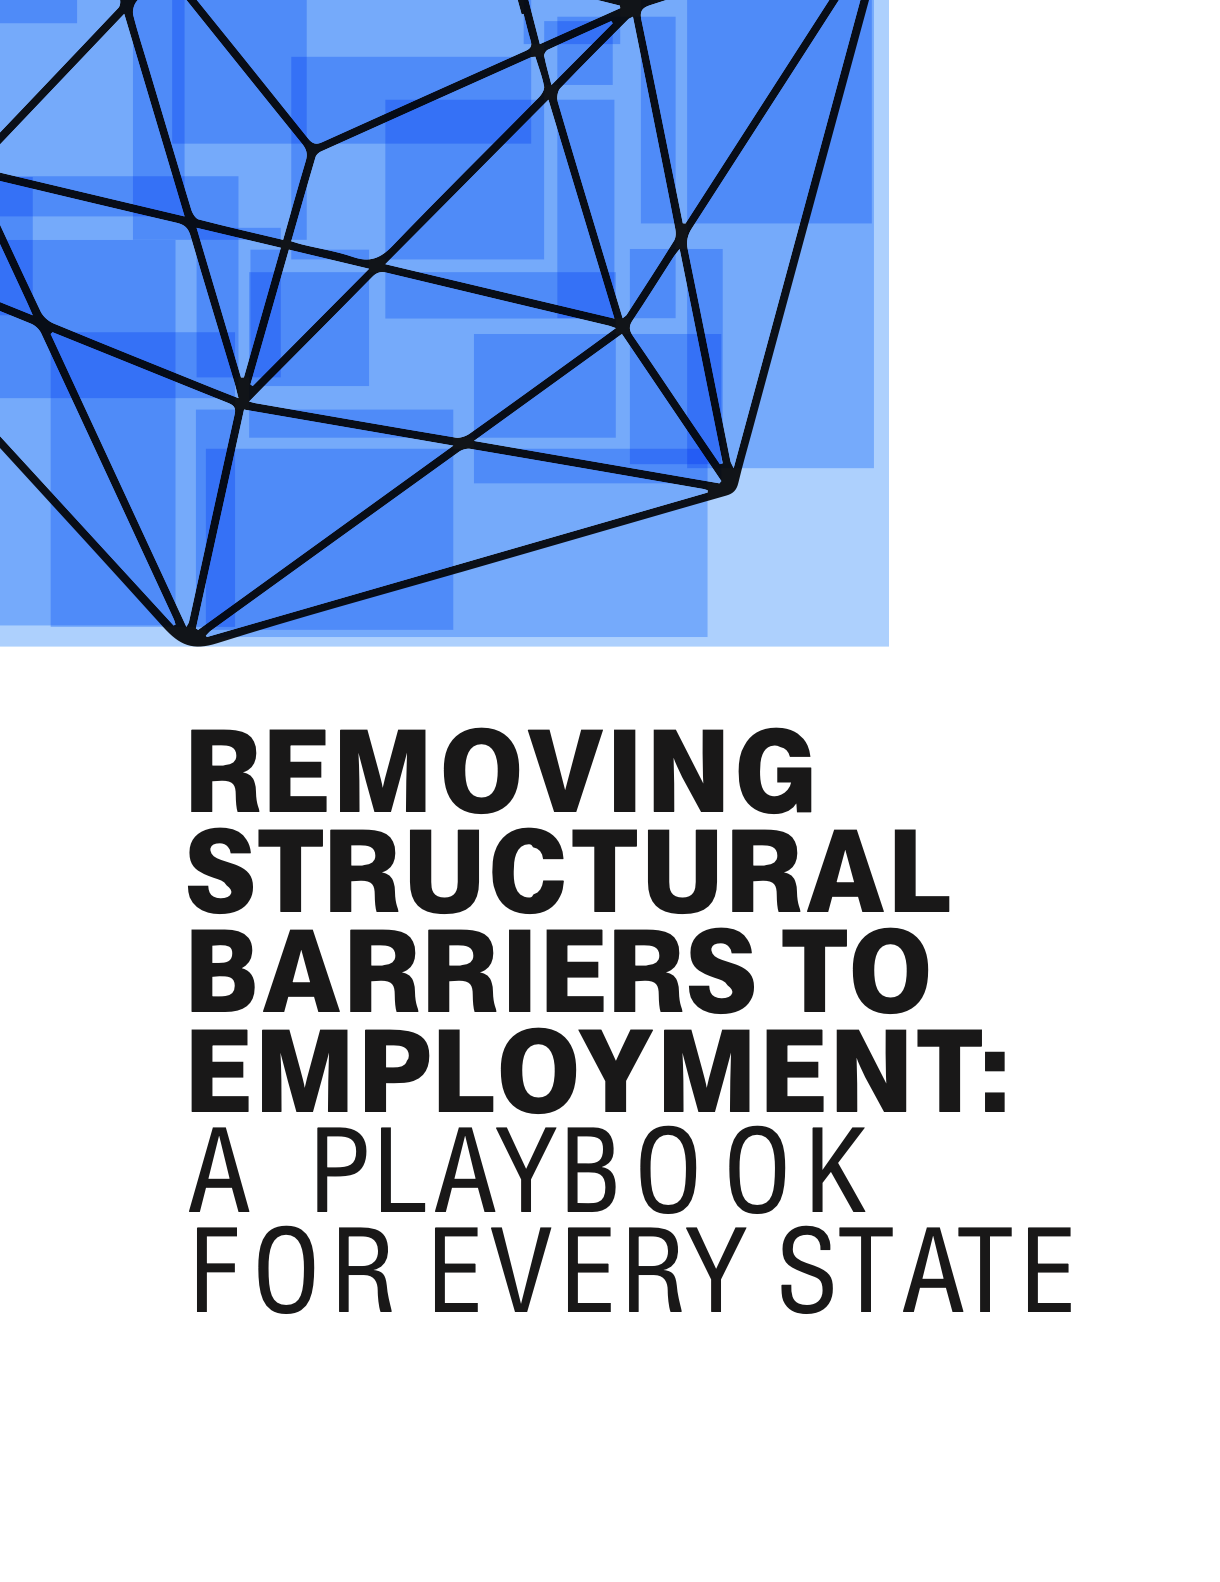 Removing Structural Barriers to Employment playbook cover image